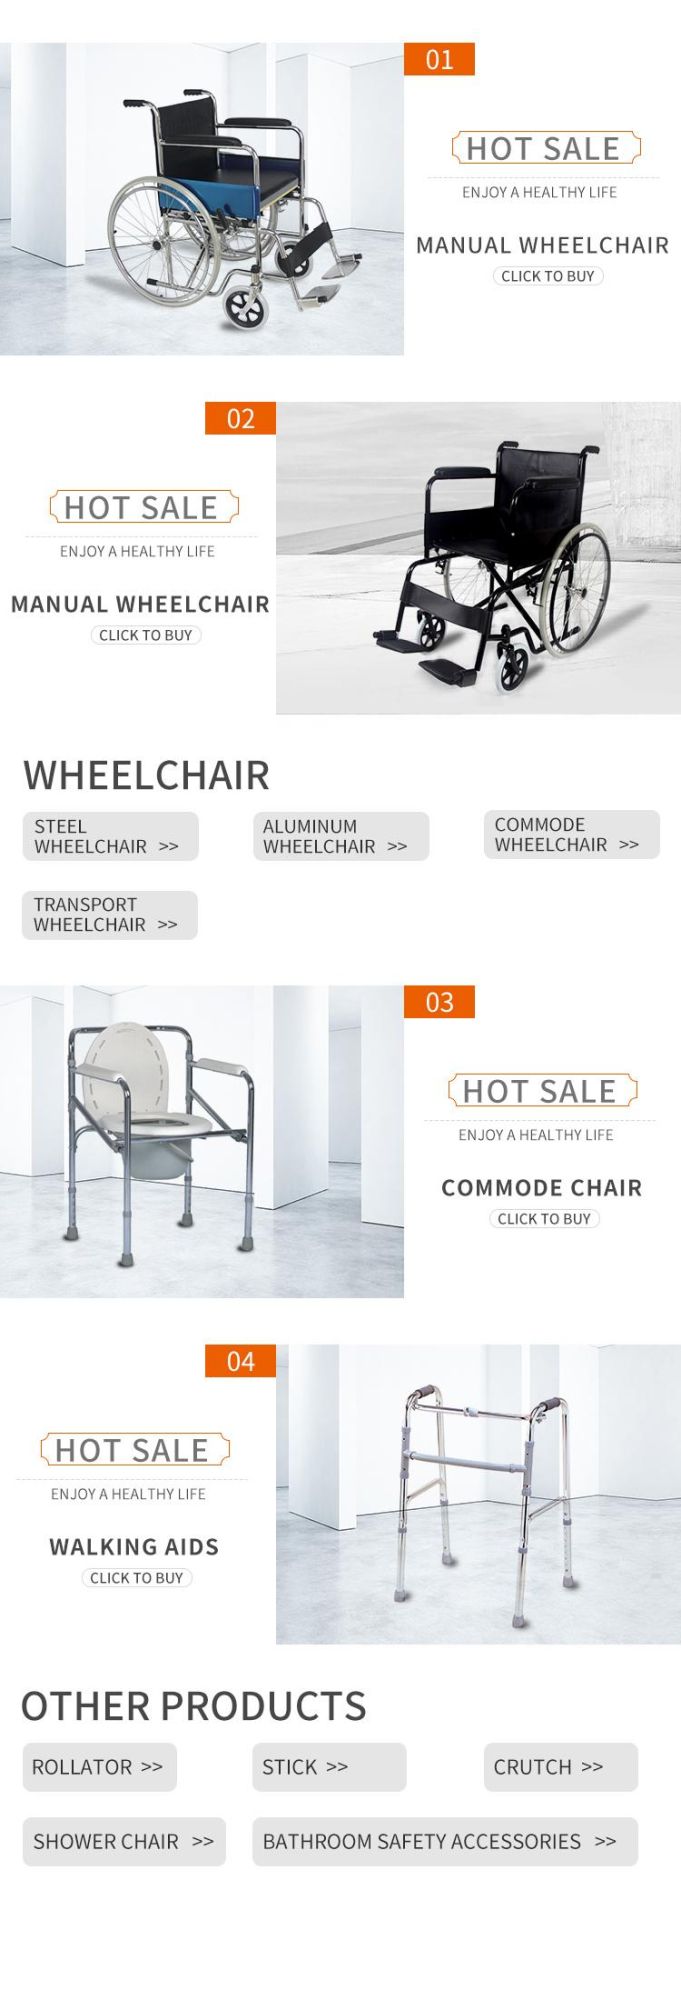 Folding Steel Manual Wheelchair with Commode Seat